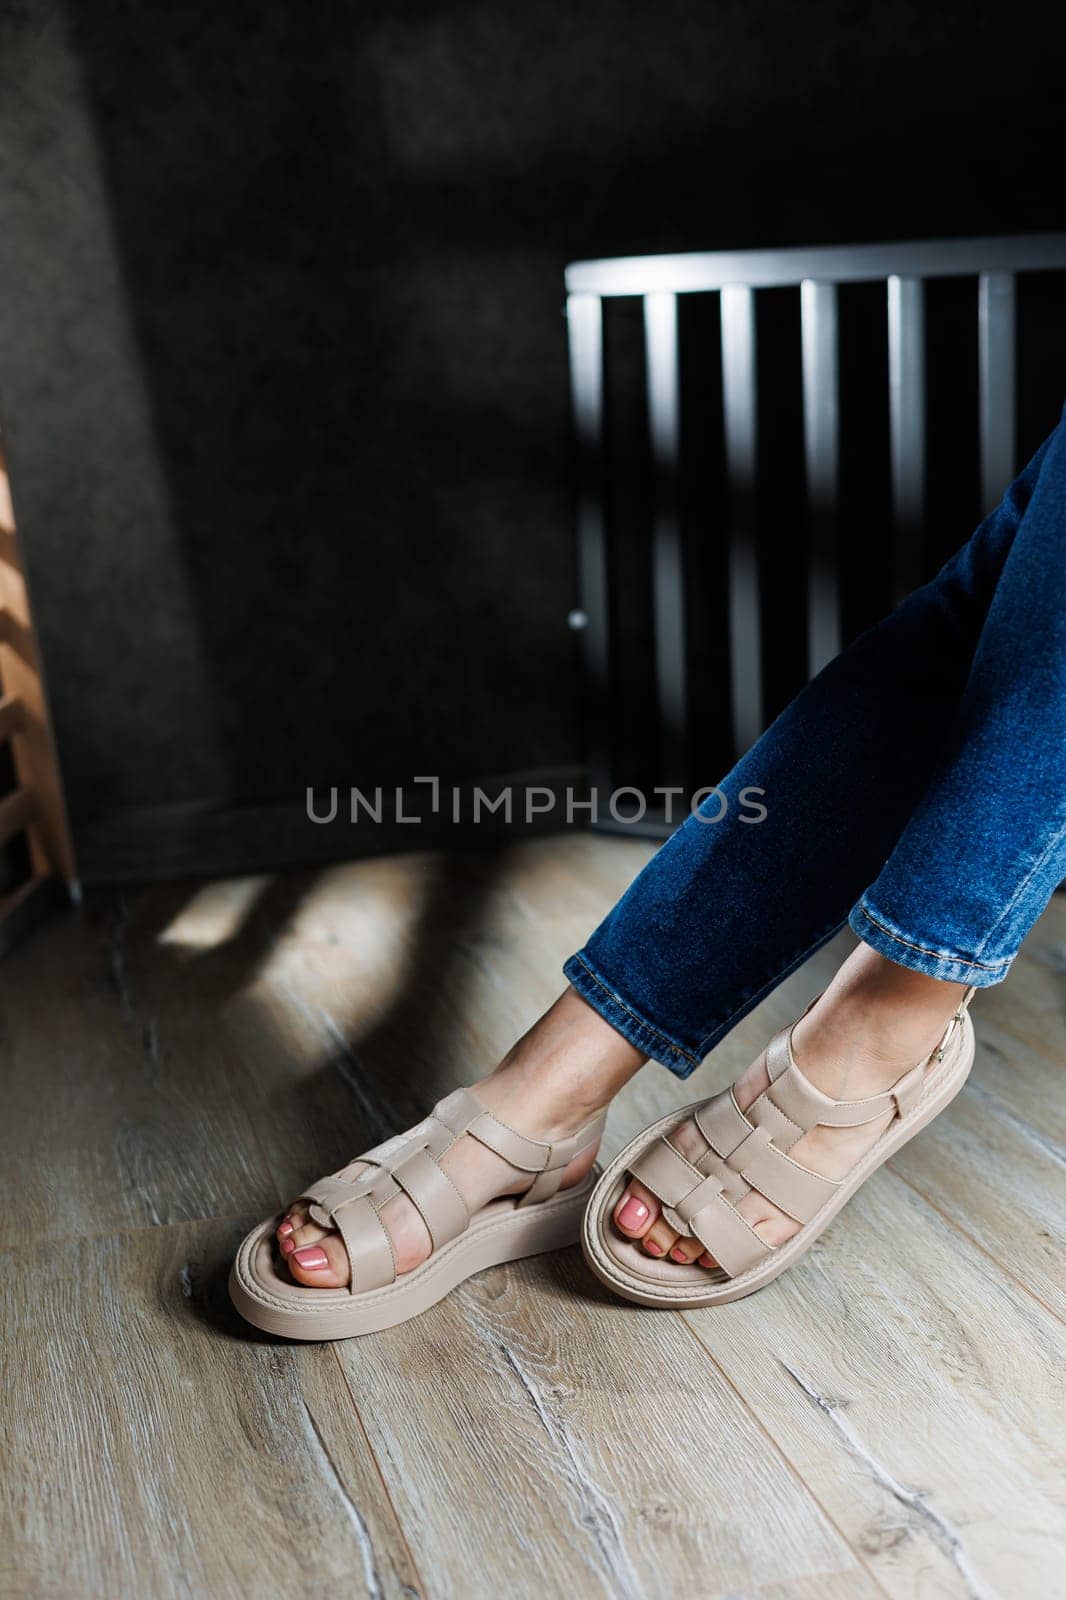 Summer women's sandals. Collection of women's leather summer sandals. Slender female legs in beige leather sandals without heels. by Dmitrytph